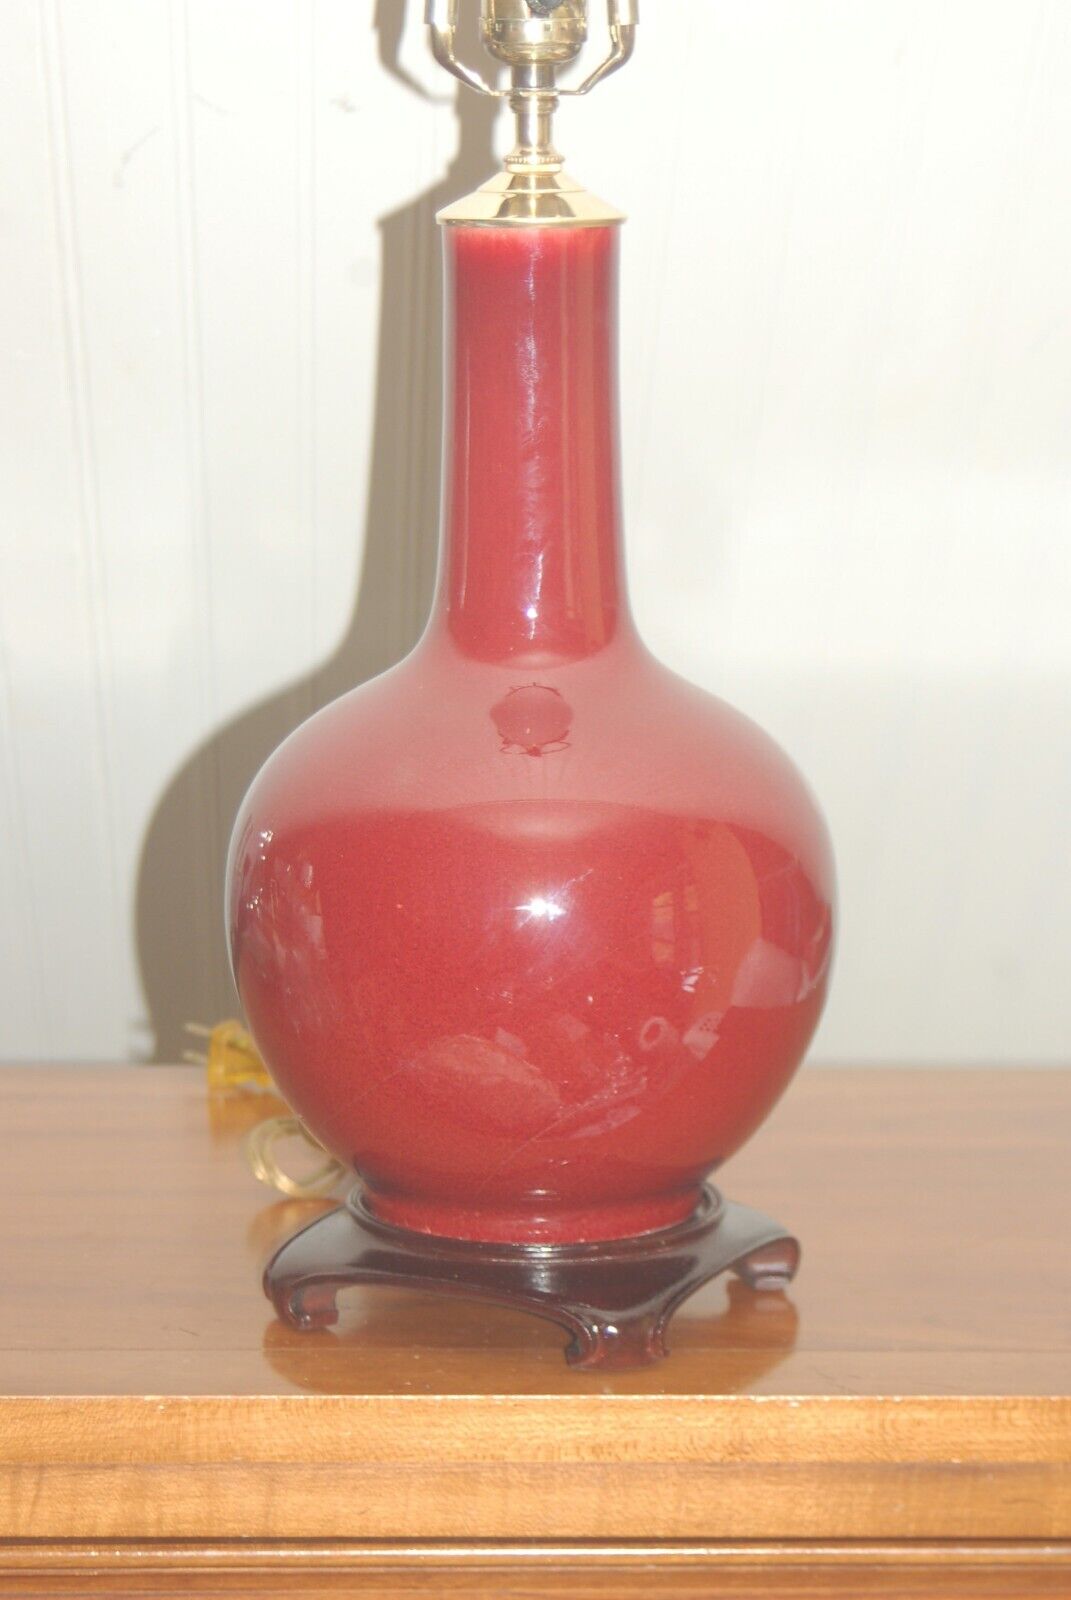 CHINESE OXBLOOD Bottle LAMP Red White Vase Sang de Boeuf Flambe Monochrome A